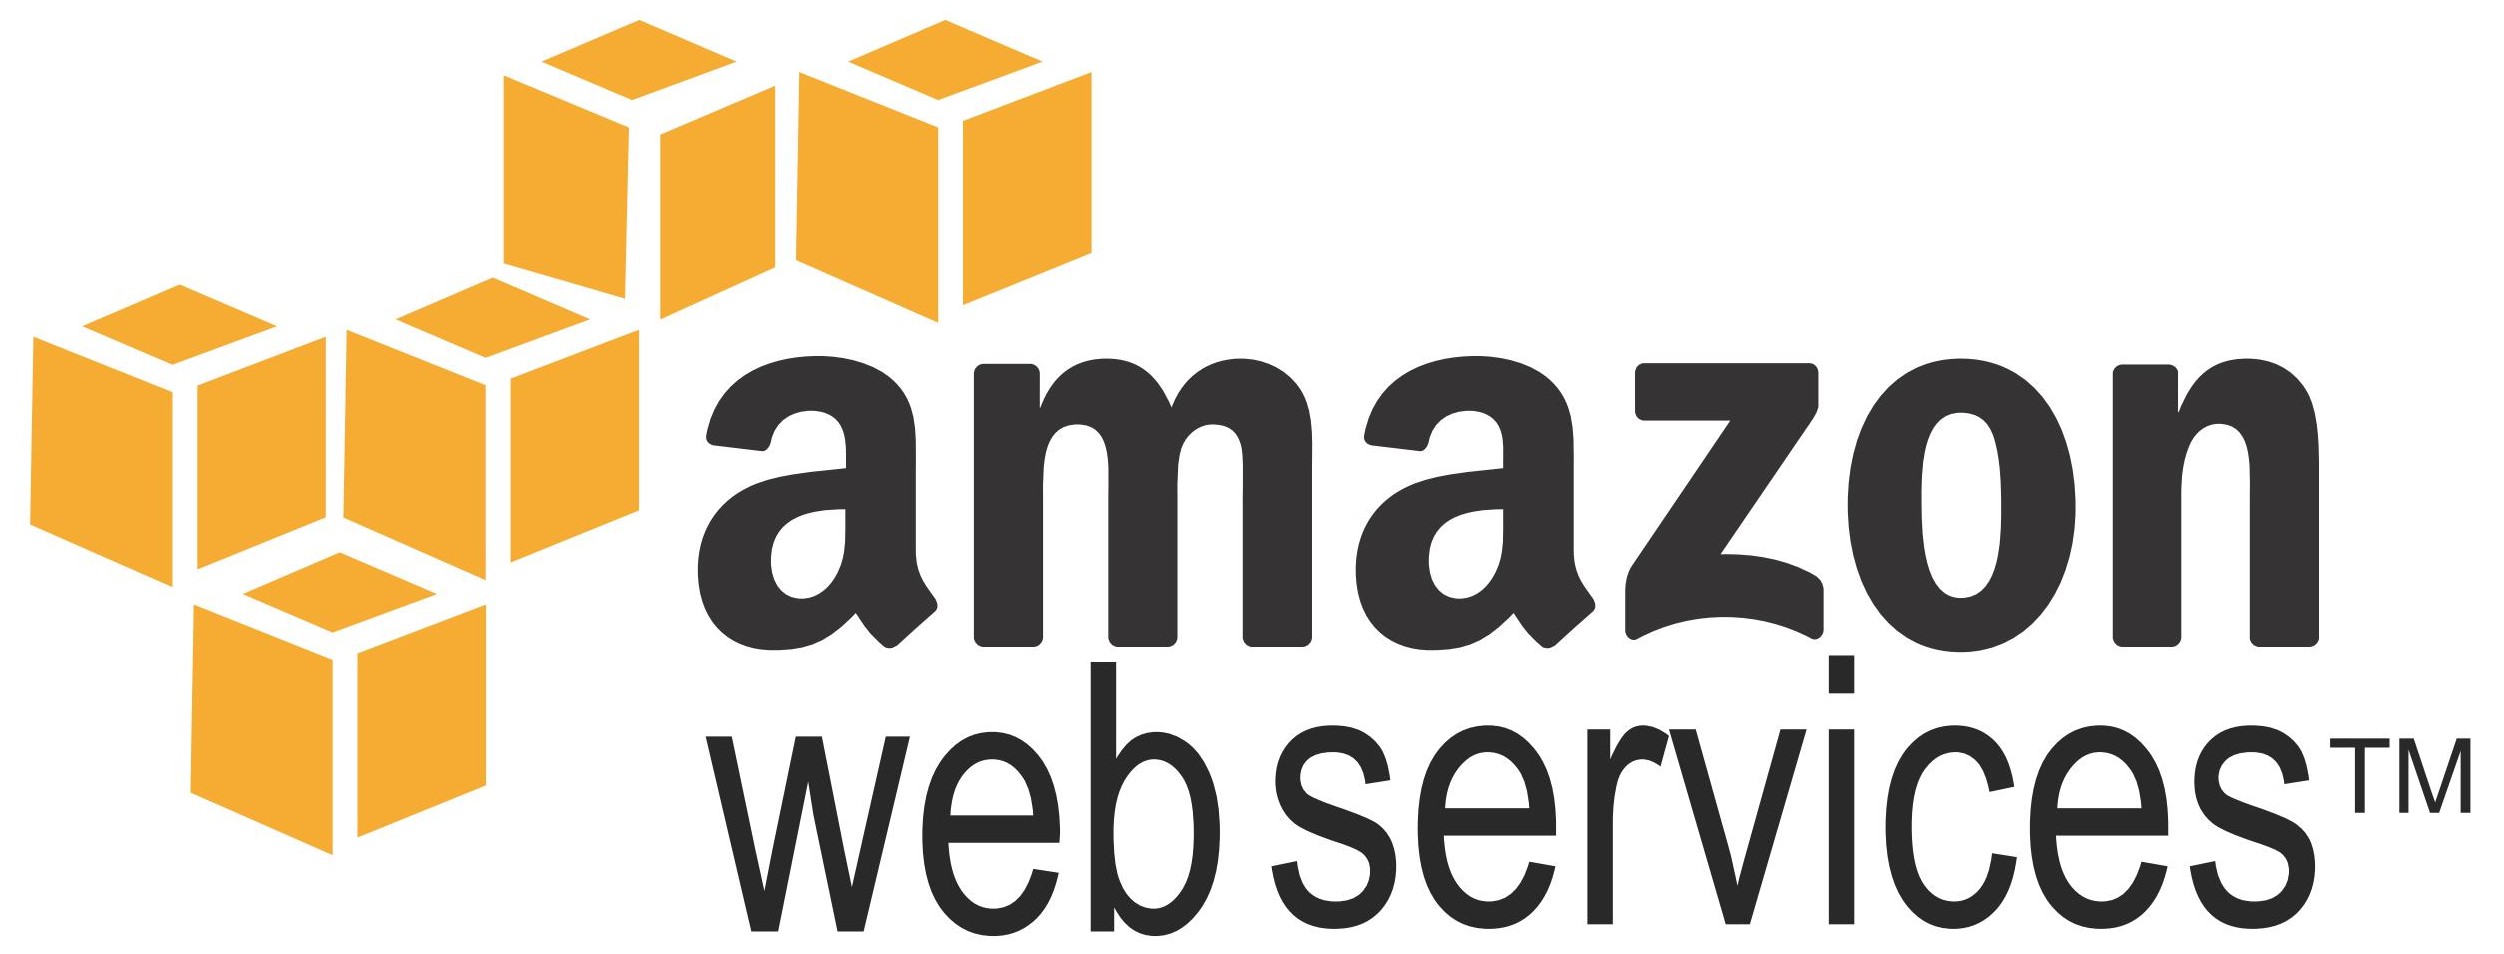 Amazon Web Services_Logo - State Grid Vector, Transparent background PNG HD thumbnail